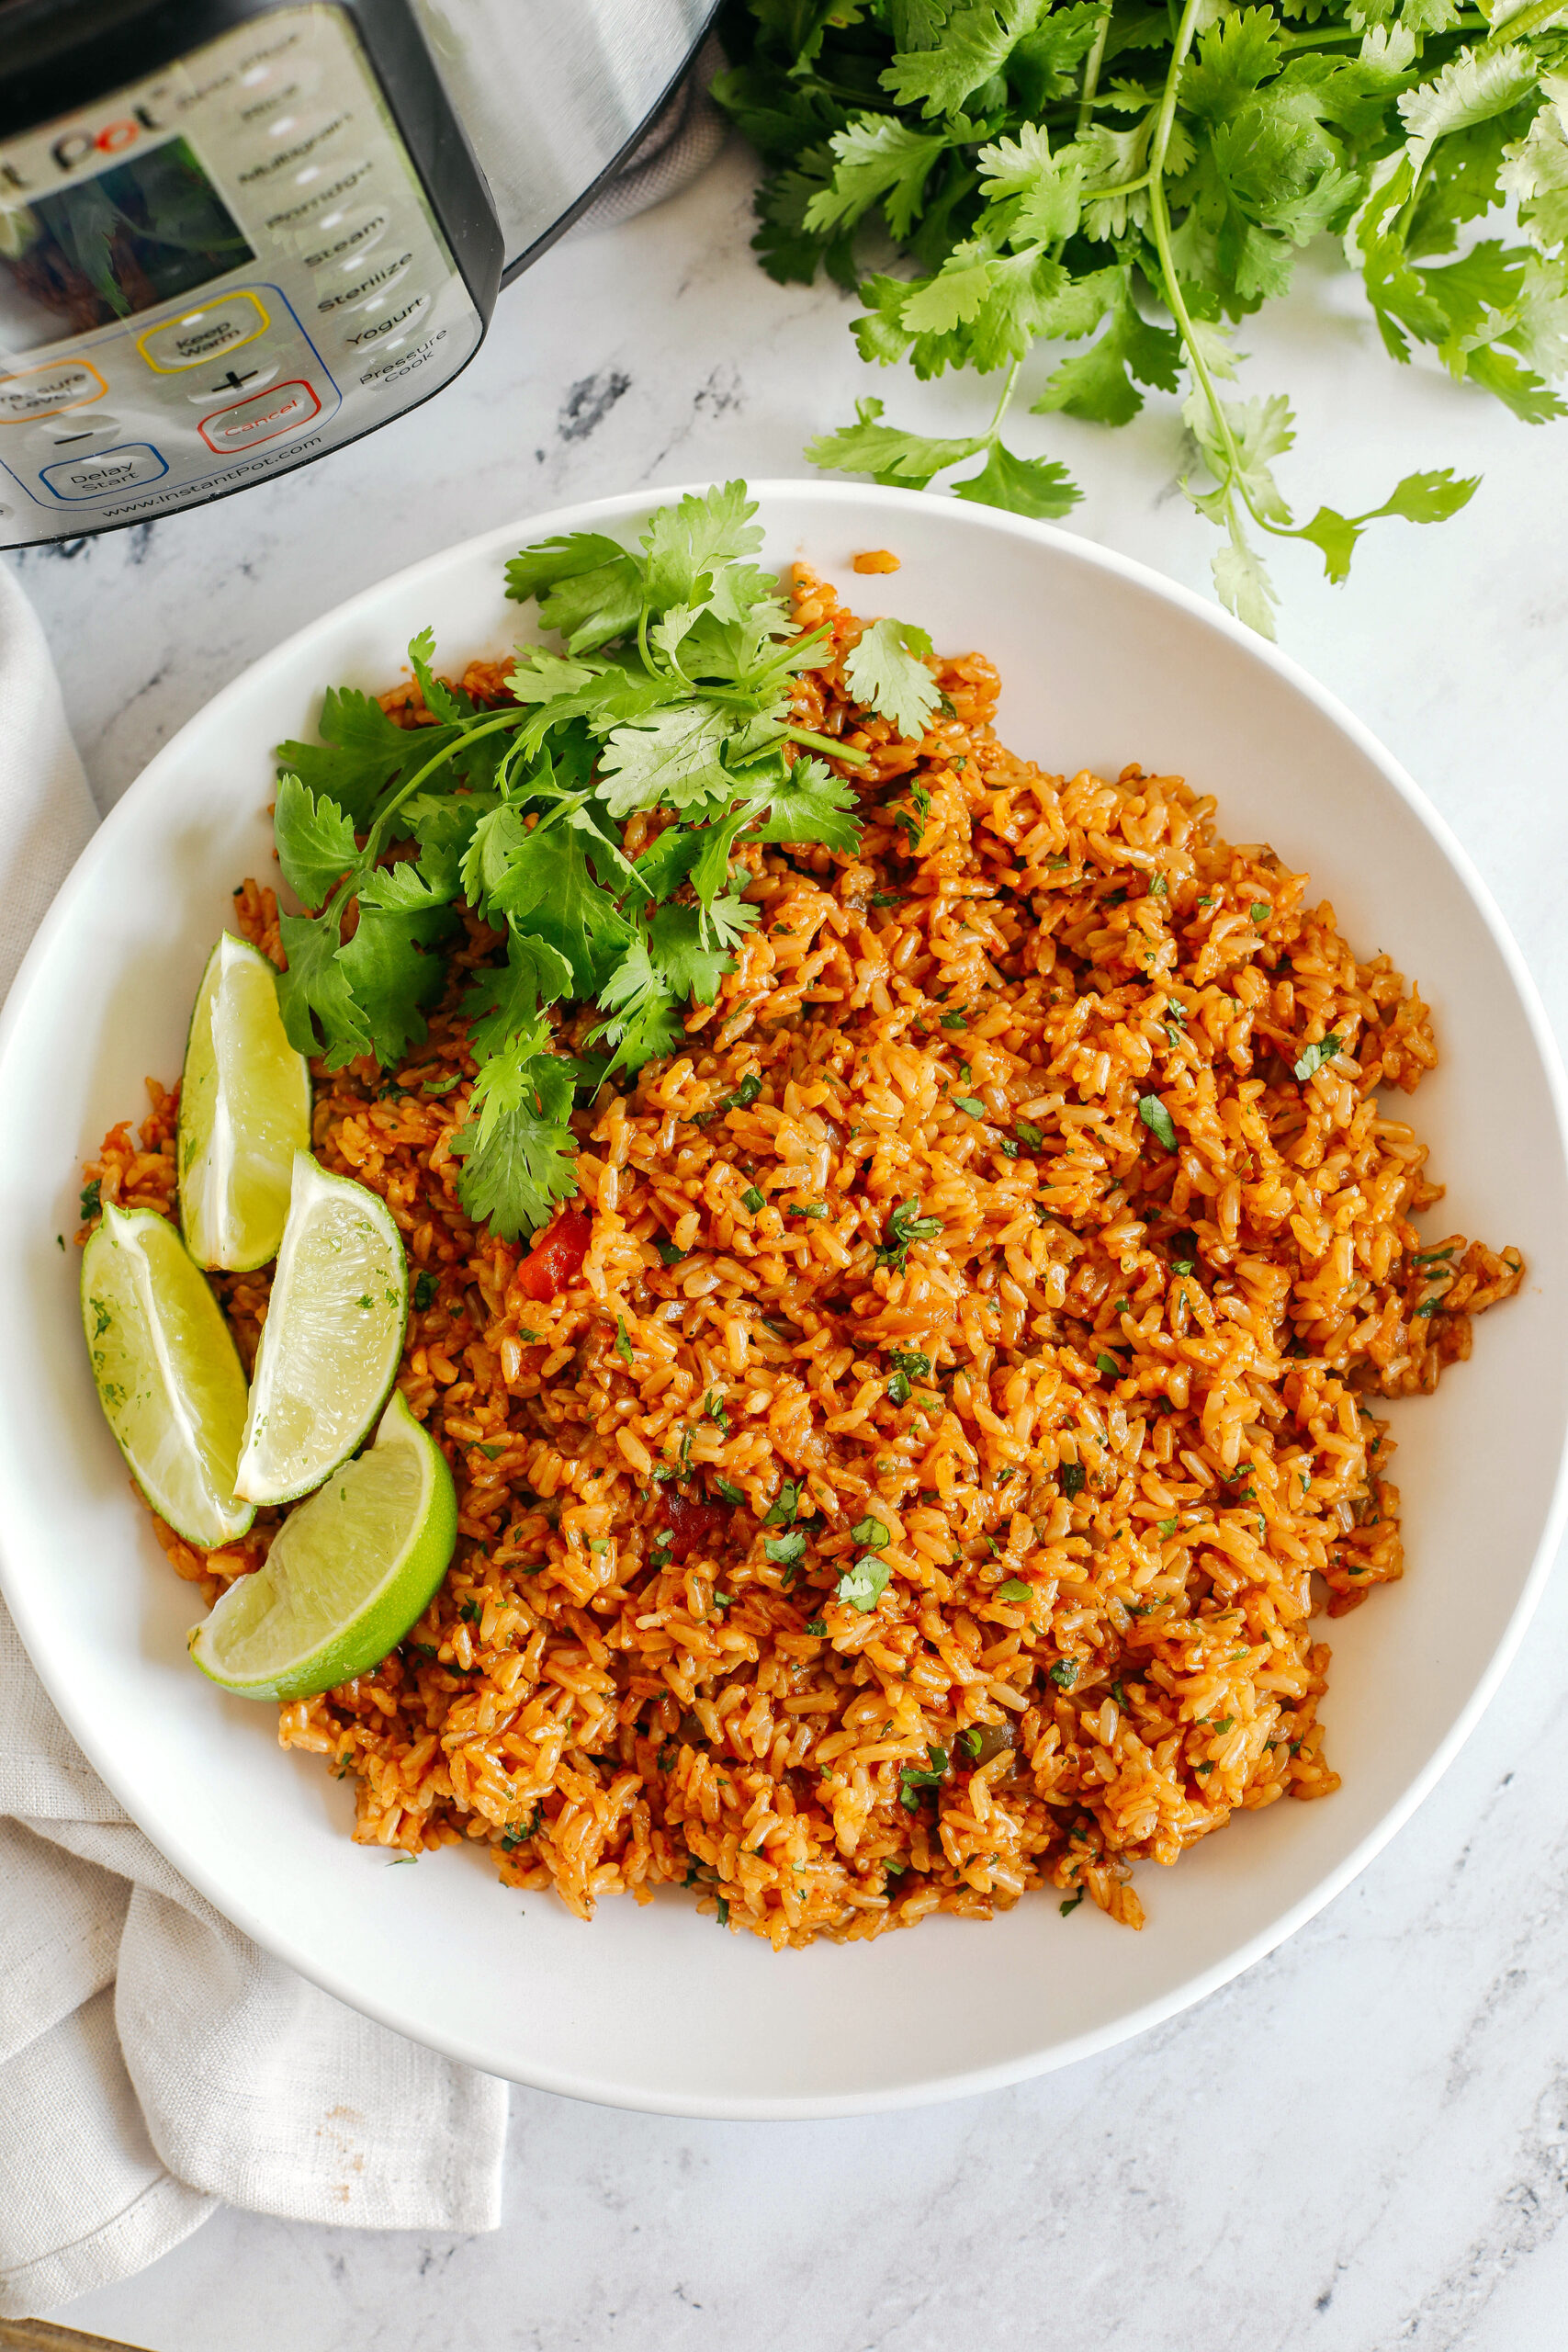 Super flavorful Mexican Brown Rice easily made right in your Instant Pot along with your favorite salsa for the perfect side dish that comes out perfectly fluffy and delicious every single time!